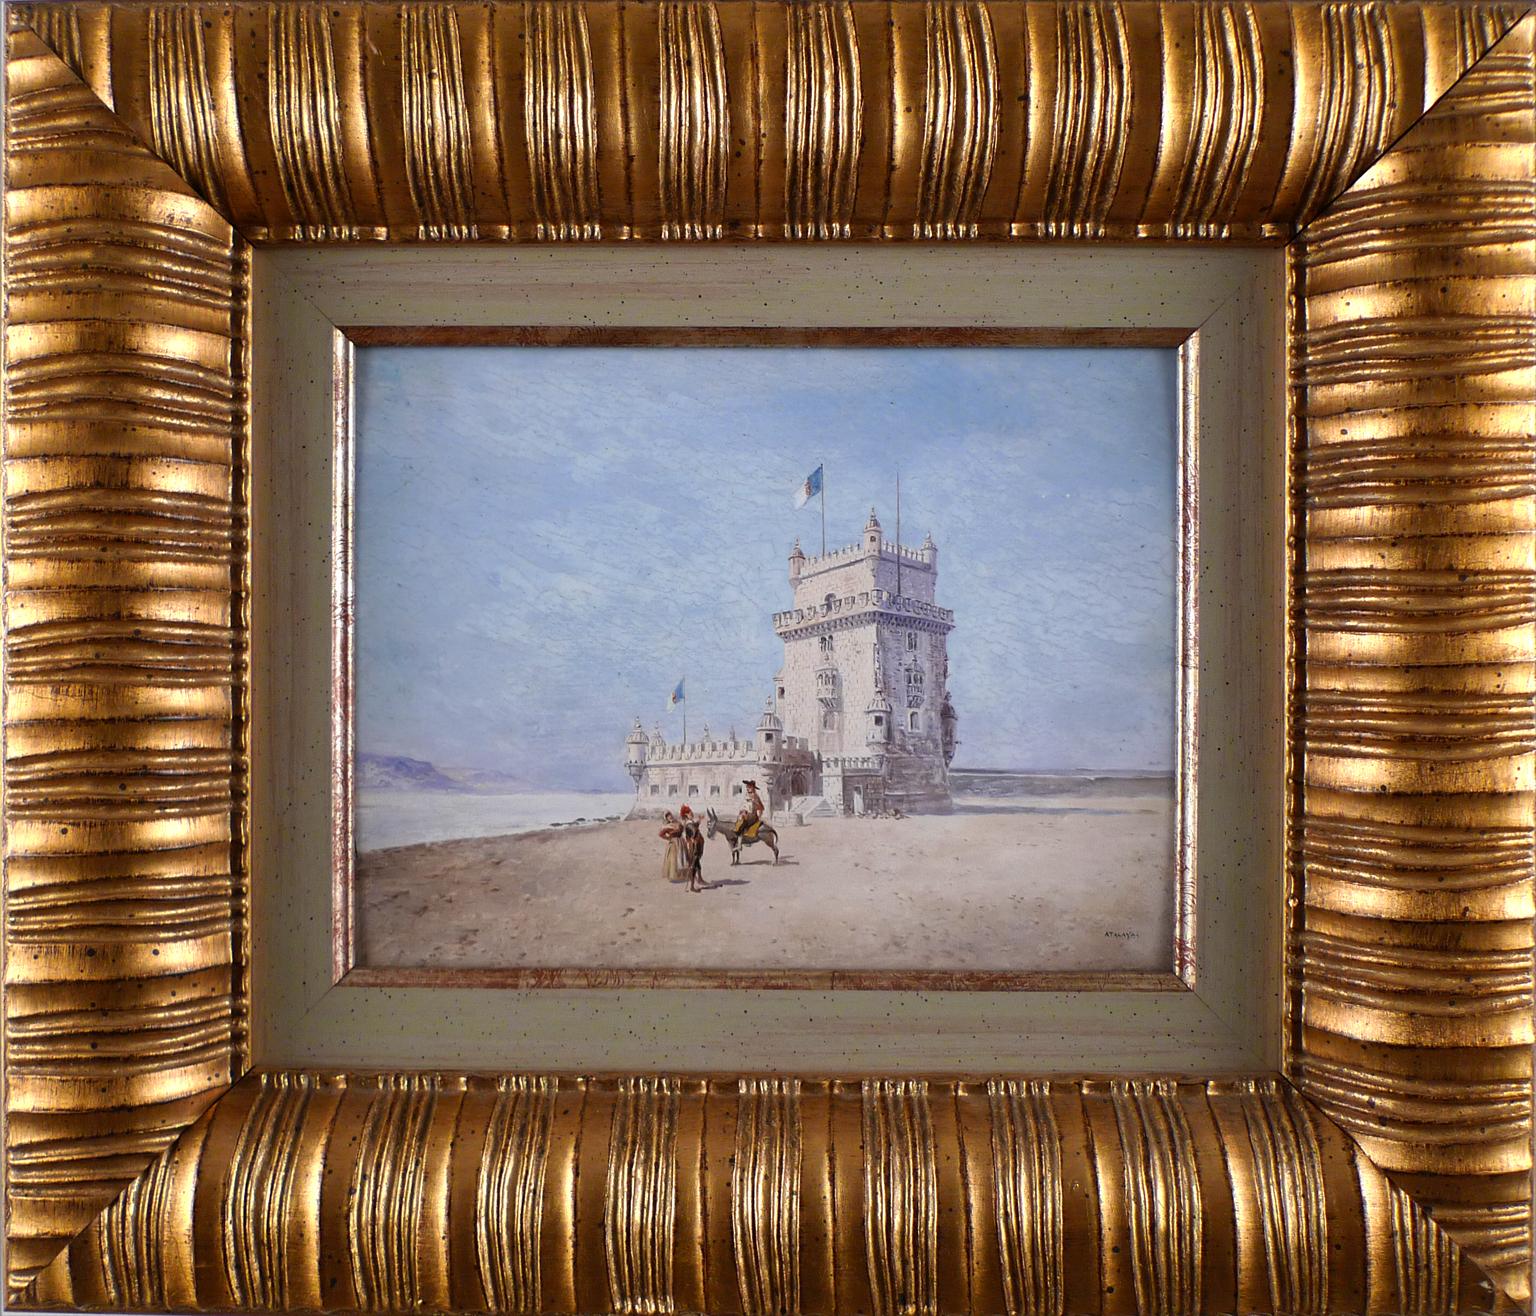 ENRIQUE ATALAYA
Spanish, 1851 - 1913
BELEM´S TOWER, LISBON
signed "ATALAYA" (lower right)
oil on wood panel
6-1/4 x 8-1/8 inches (15.8 x 20.5 cm.)
framed: 11-7/8 x 13-7/8 inches (30 x 35 cm.)

PROVENANCE
Private Collector, Madrid

Enrique Atalaya